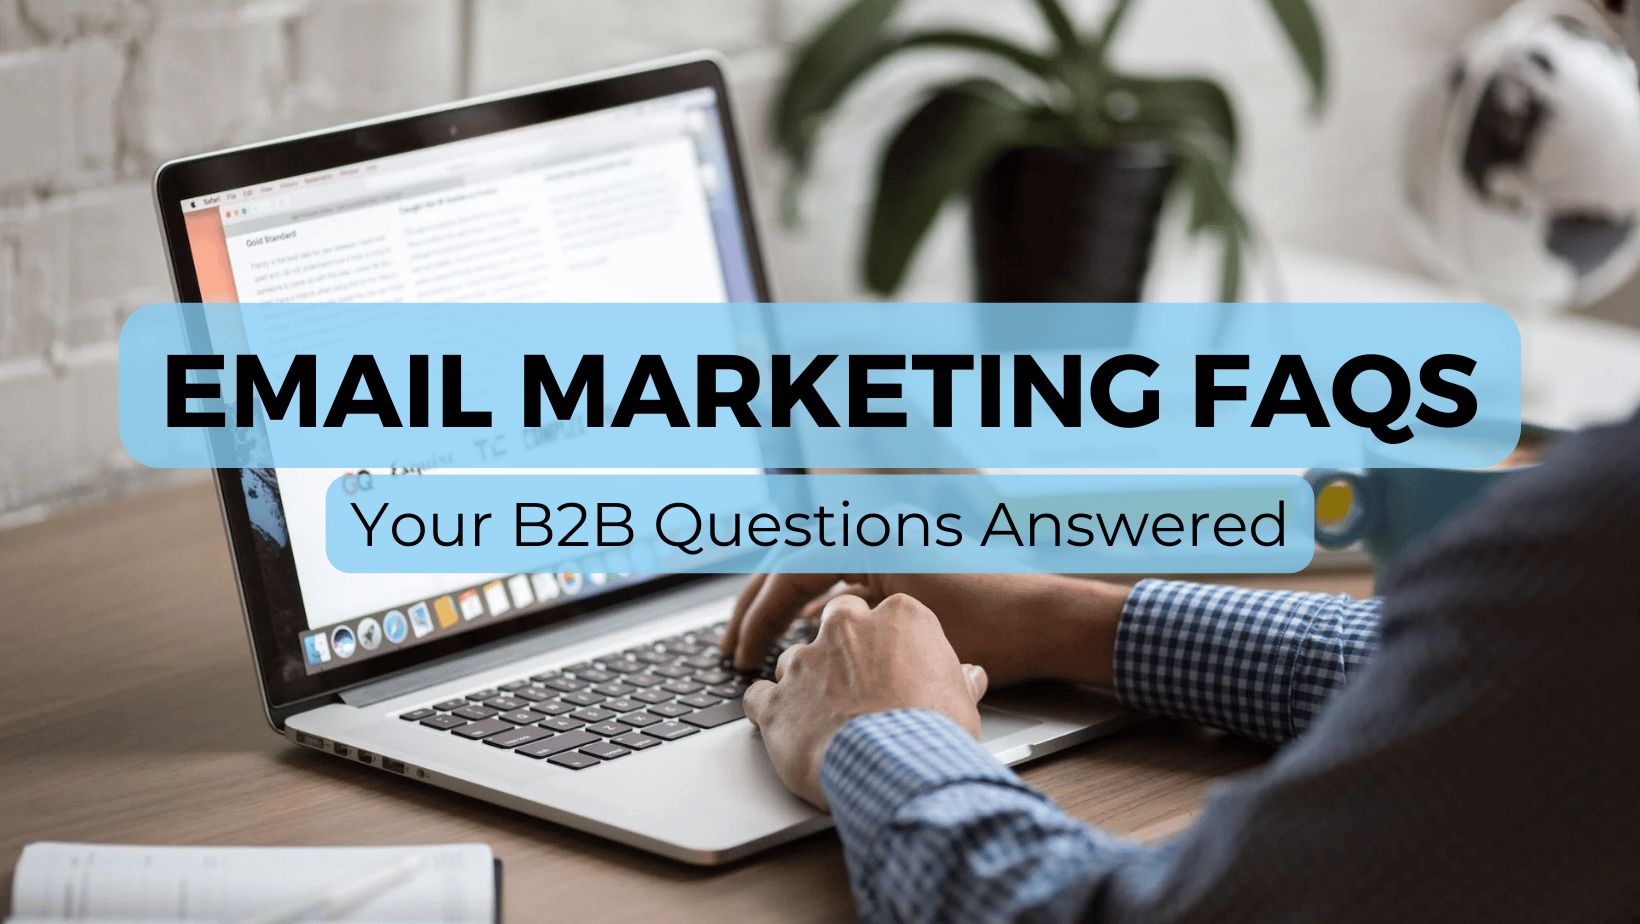 Email Marketing FAQs: Your B2B Questions Answered